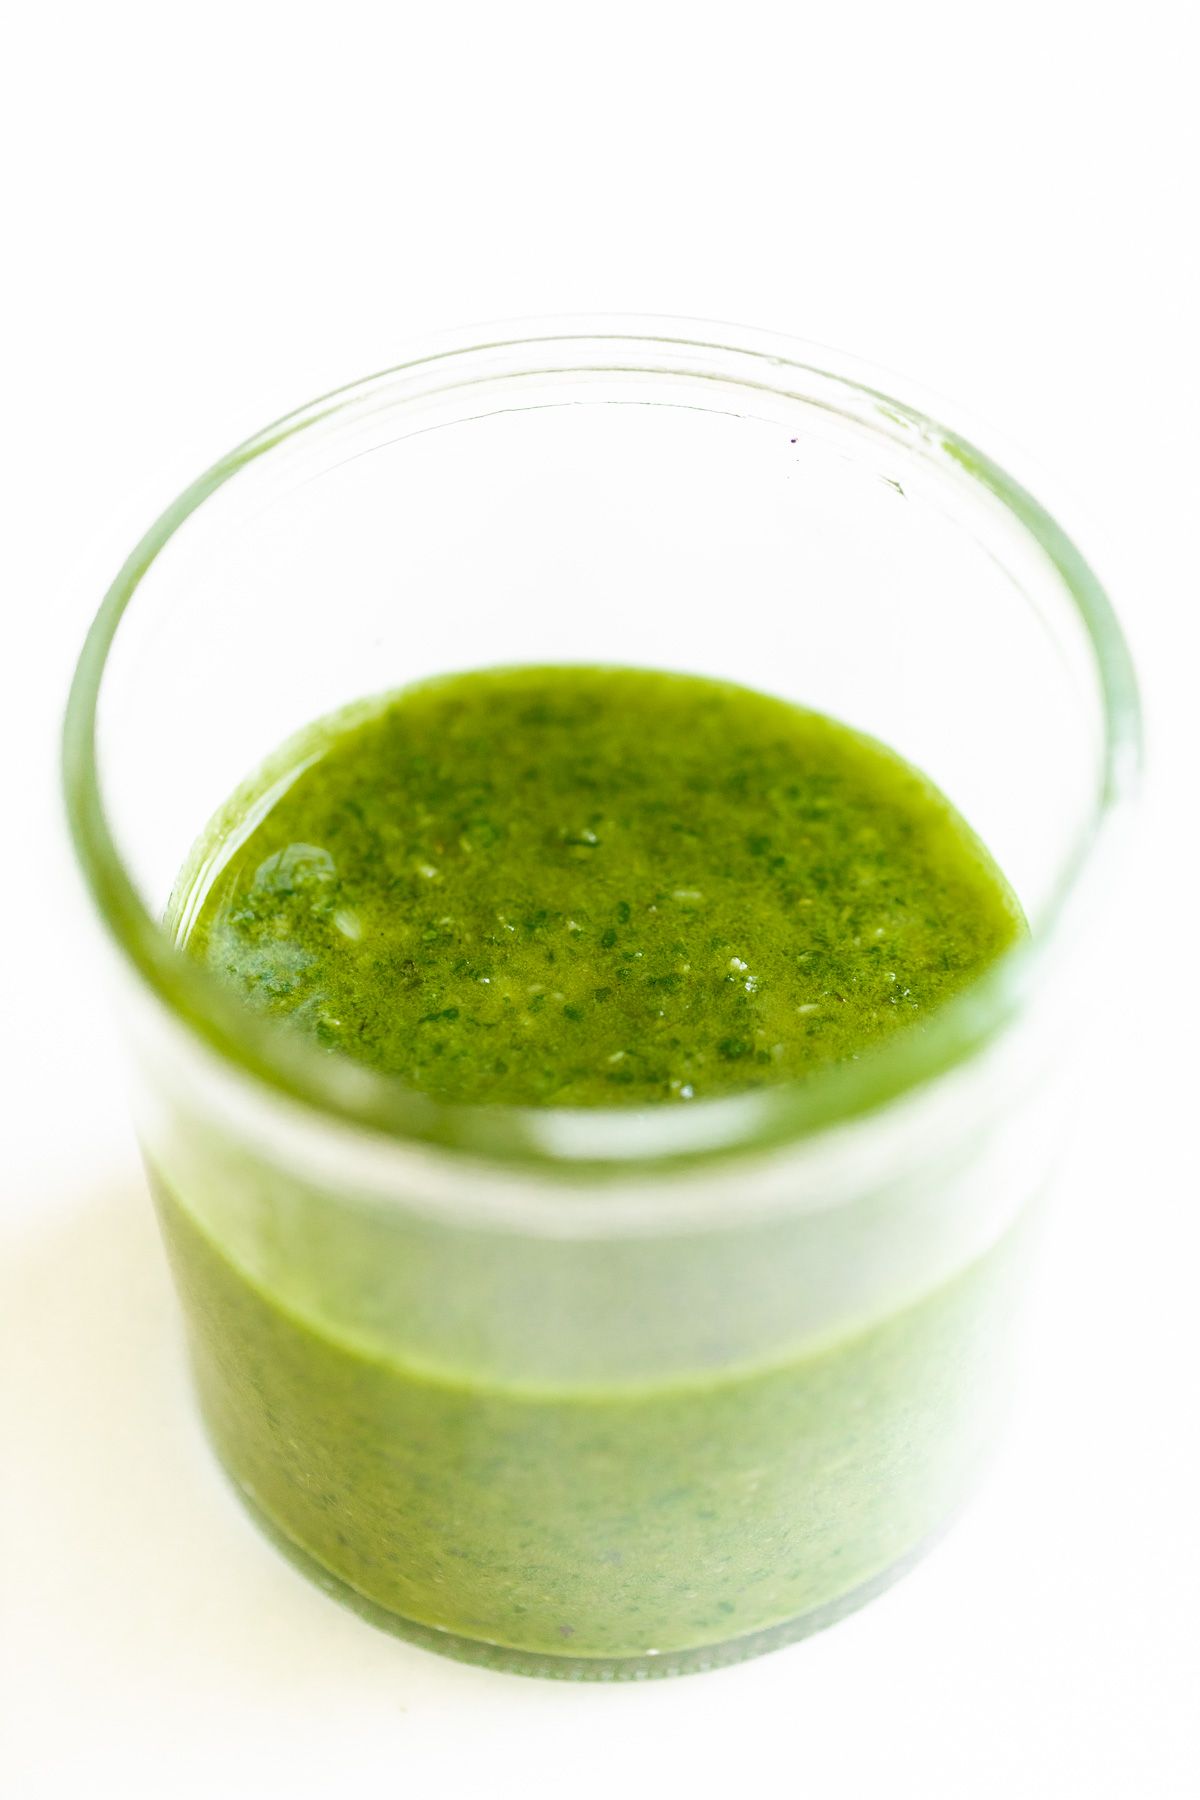 Basil pesto in a small clear glass jar on a marble surface.